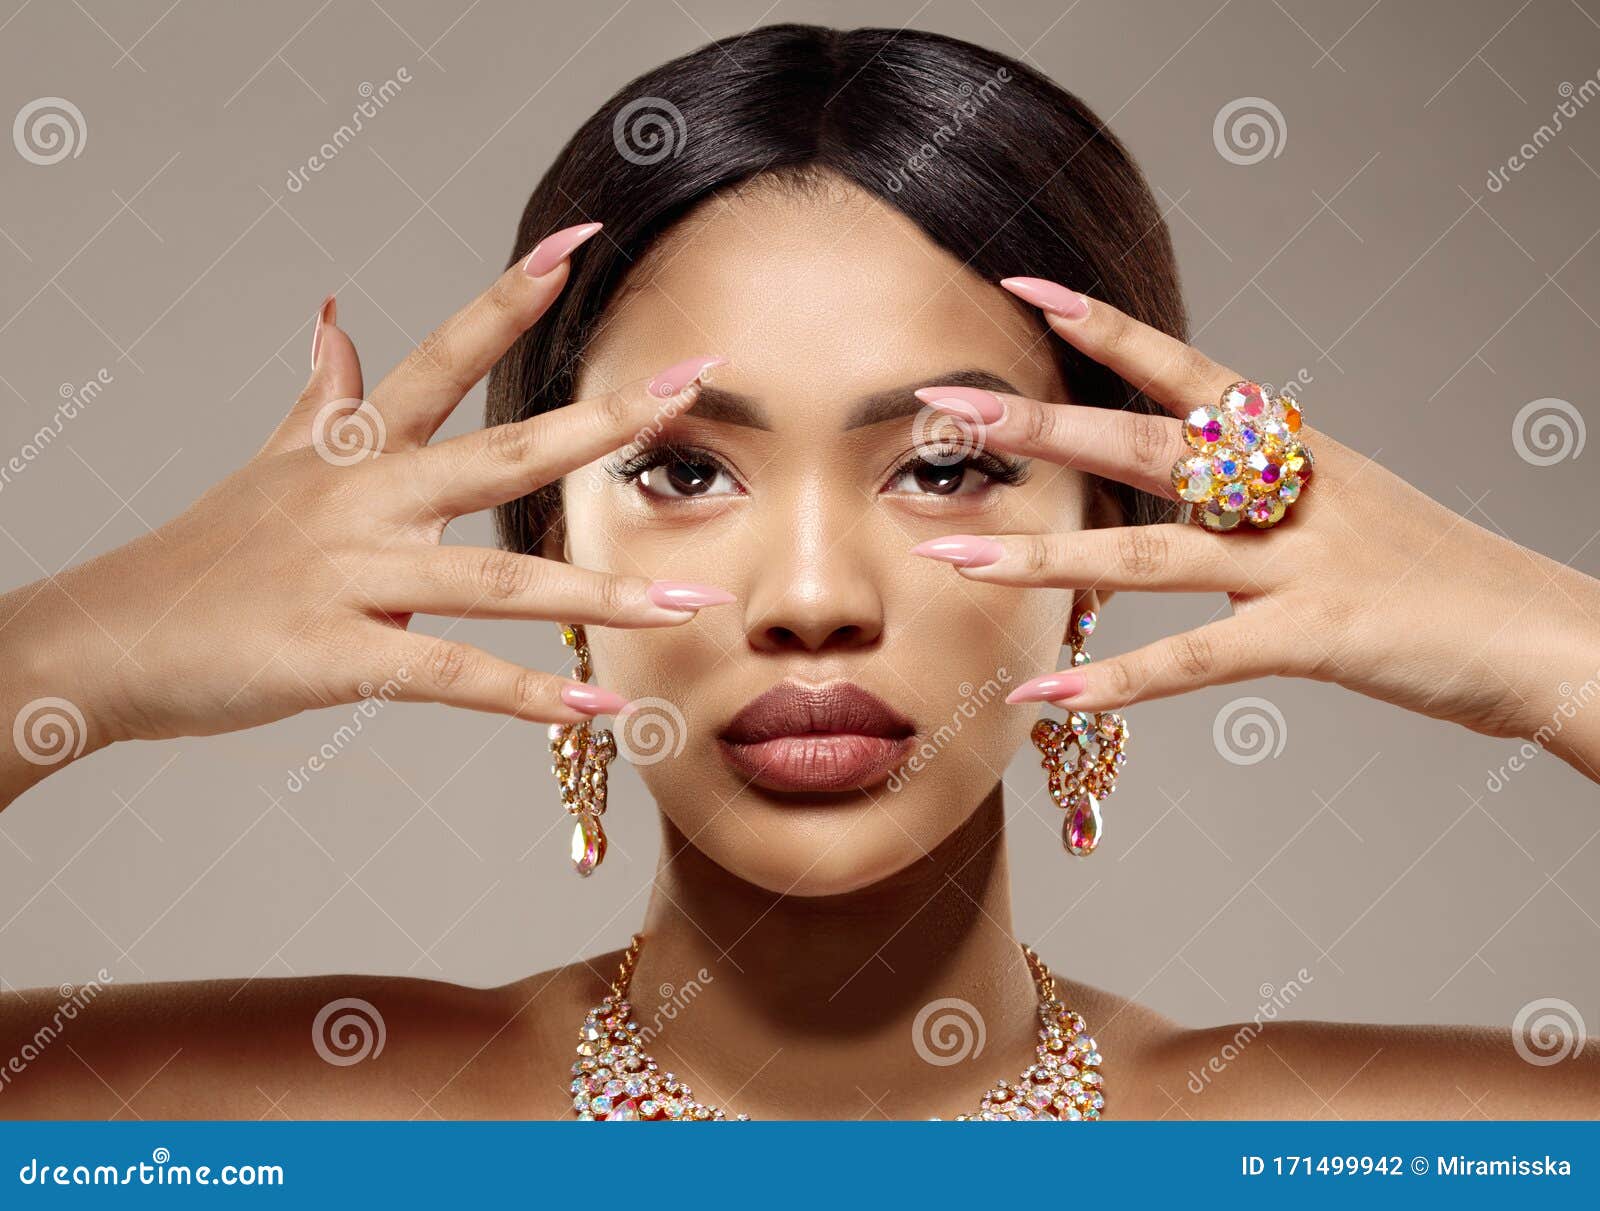 beauty black skin woman african ethnic female face. luxury young african american model with jewelry, earrings and ring